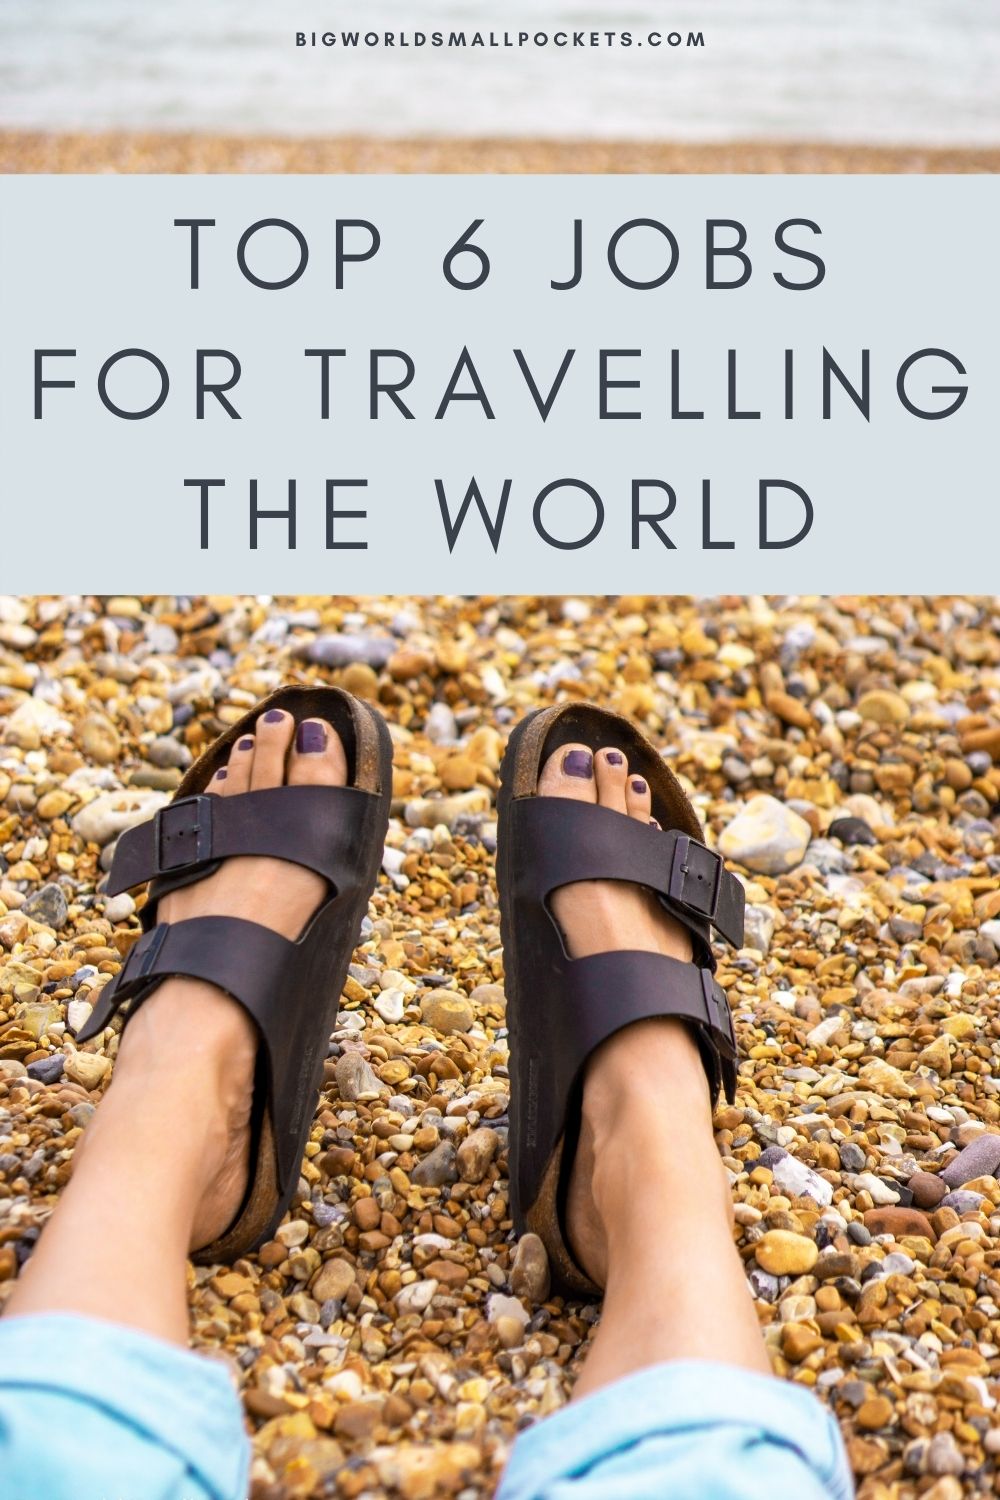 Top 6 Jobs for Working & Travelling The World + How to Find Them